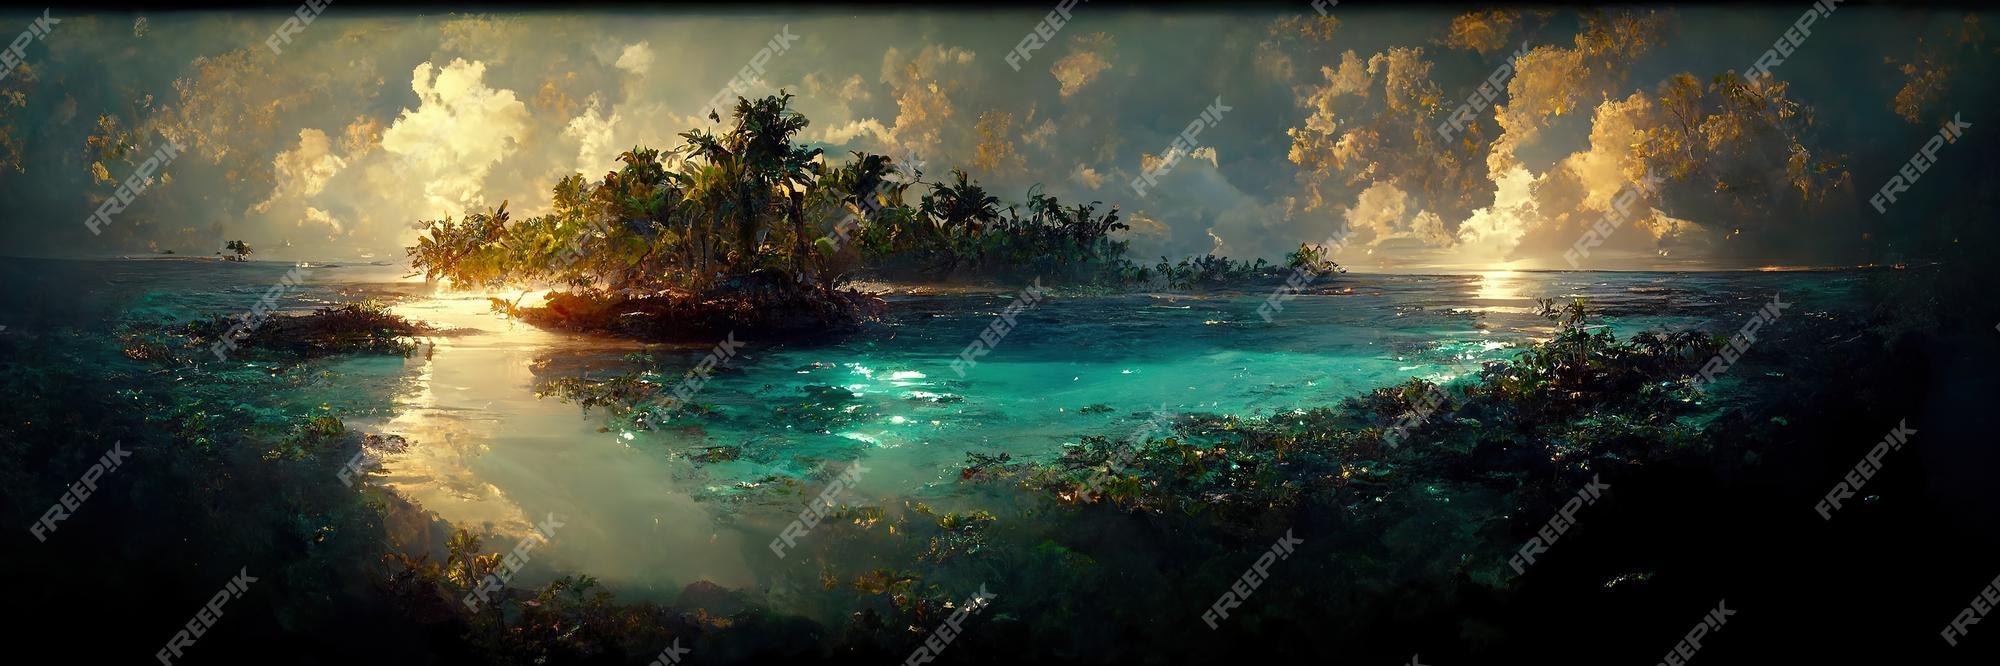 Premium Photo Tropical Island With Beautiful Landscape And Deep